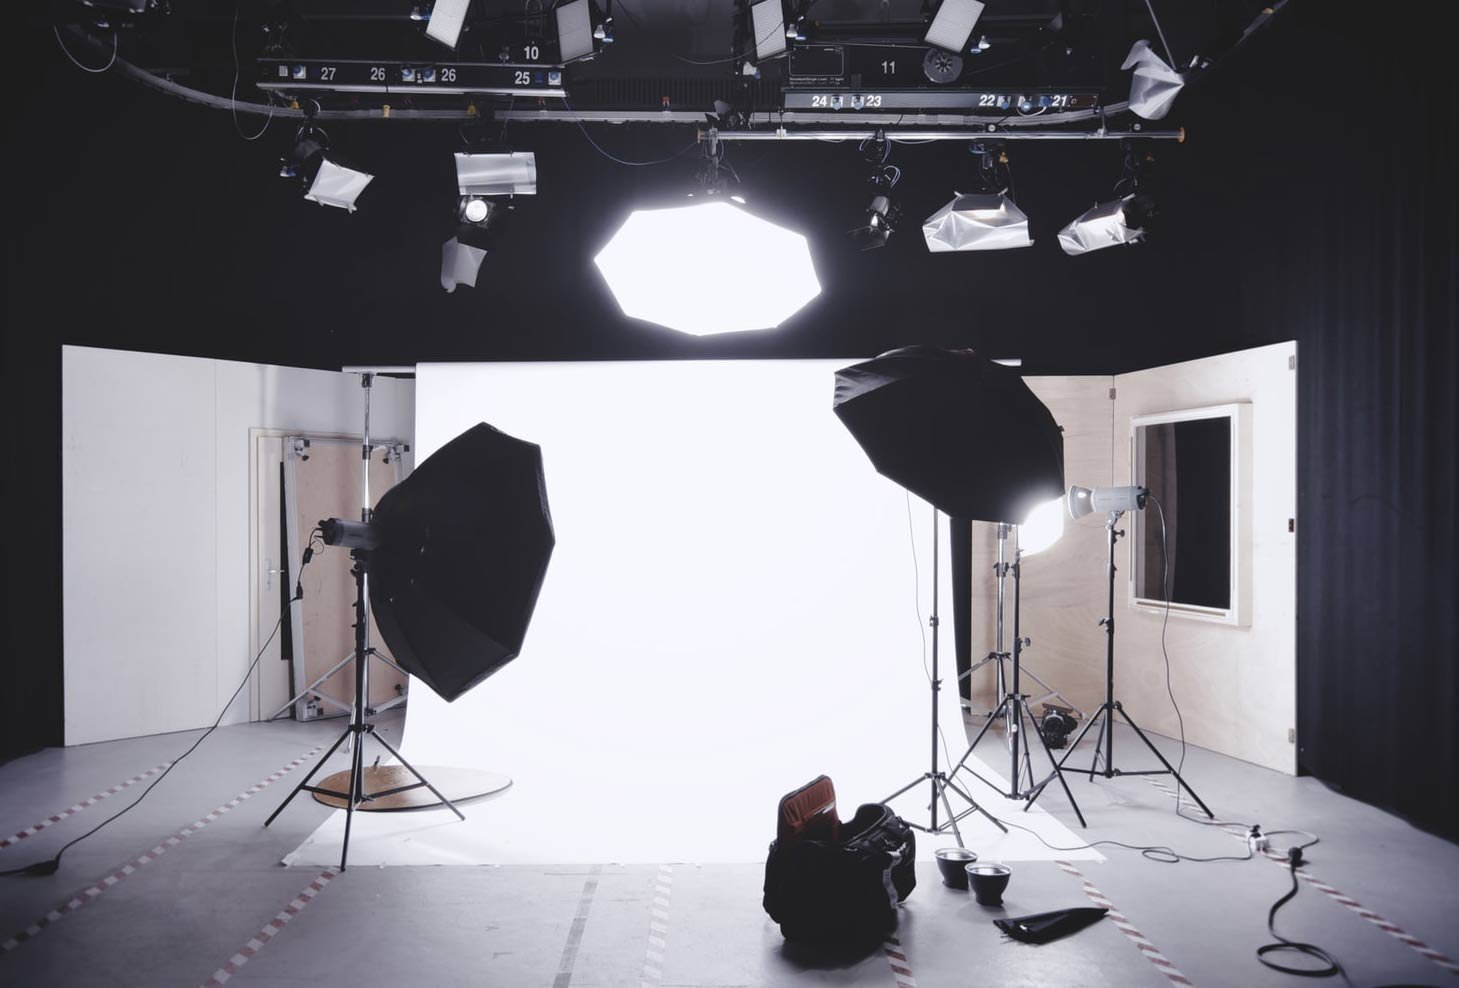 shooting products in a studio.